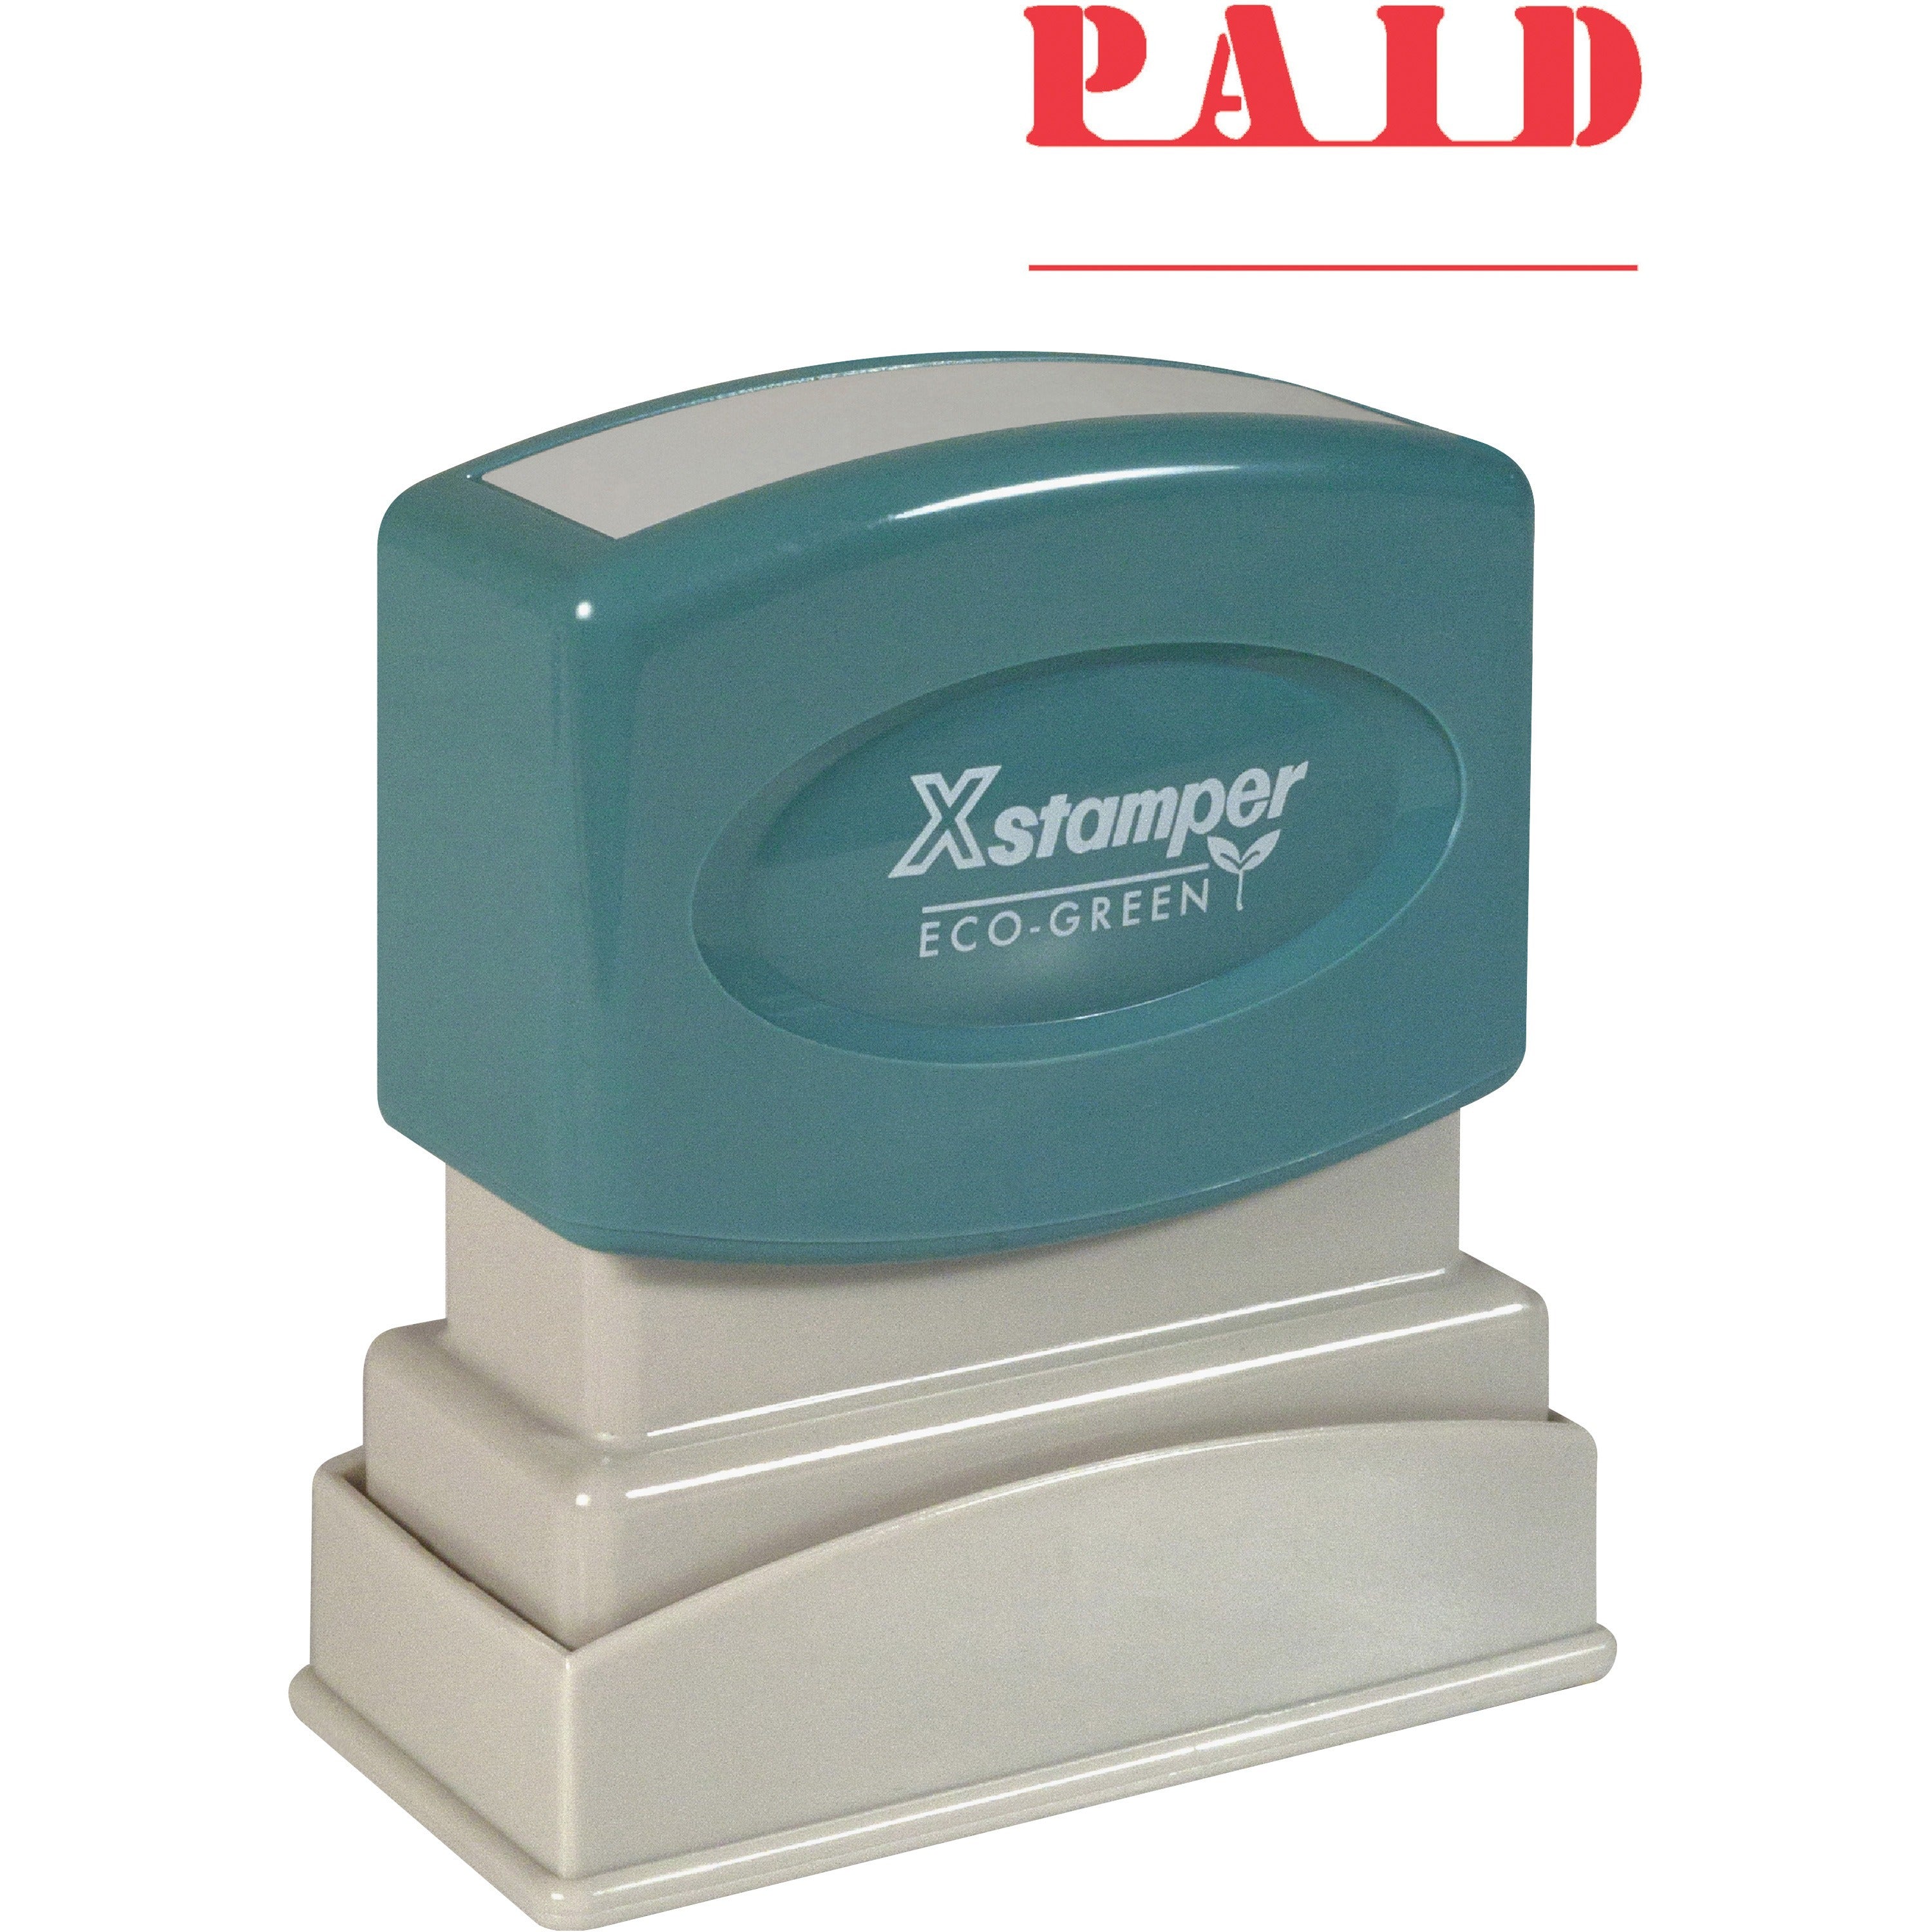 Xstamper PAID Title Stamp - Message Stamp - "PAID" - 0.50" Impression Width x 1.62" Impression Length - 100000 Impression(s) - Red - Recycled - 1 Each - 